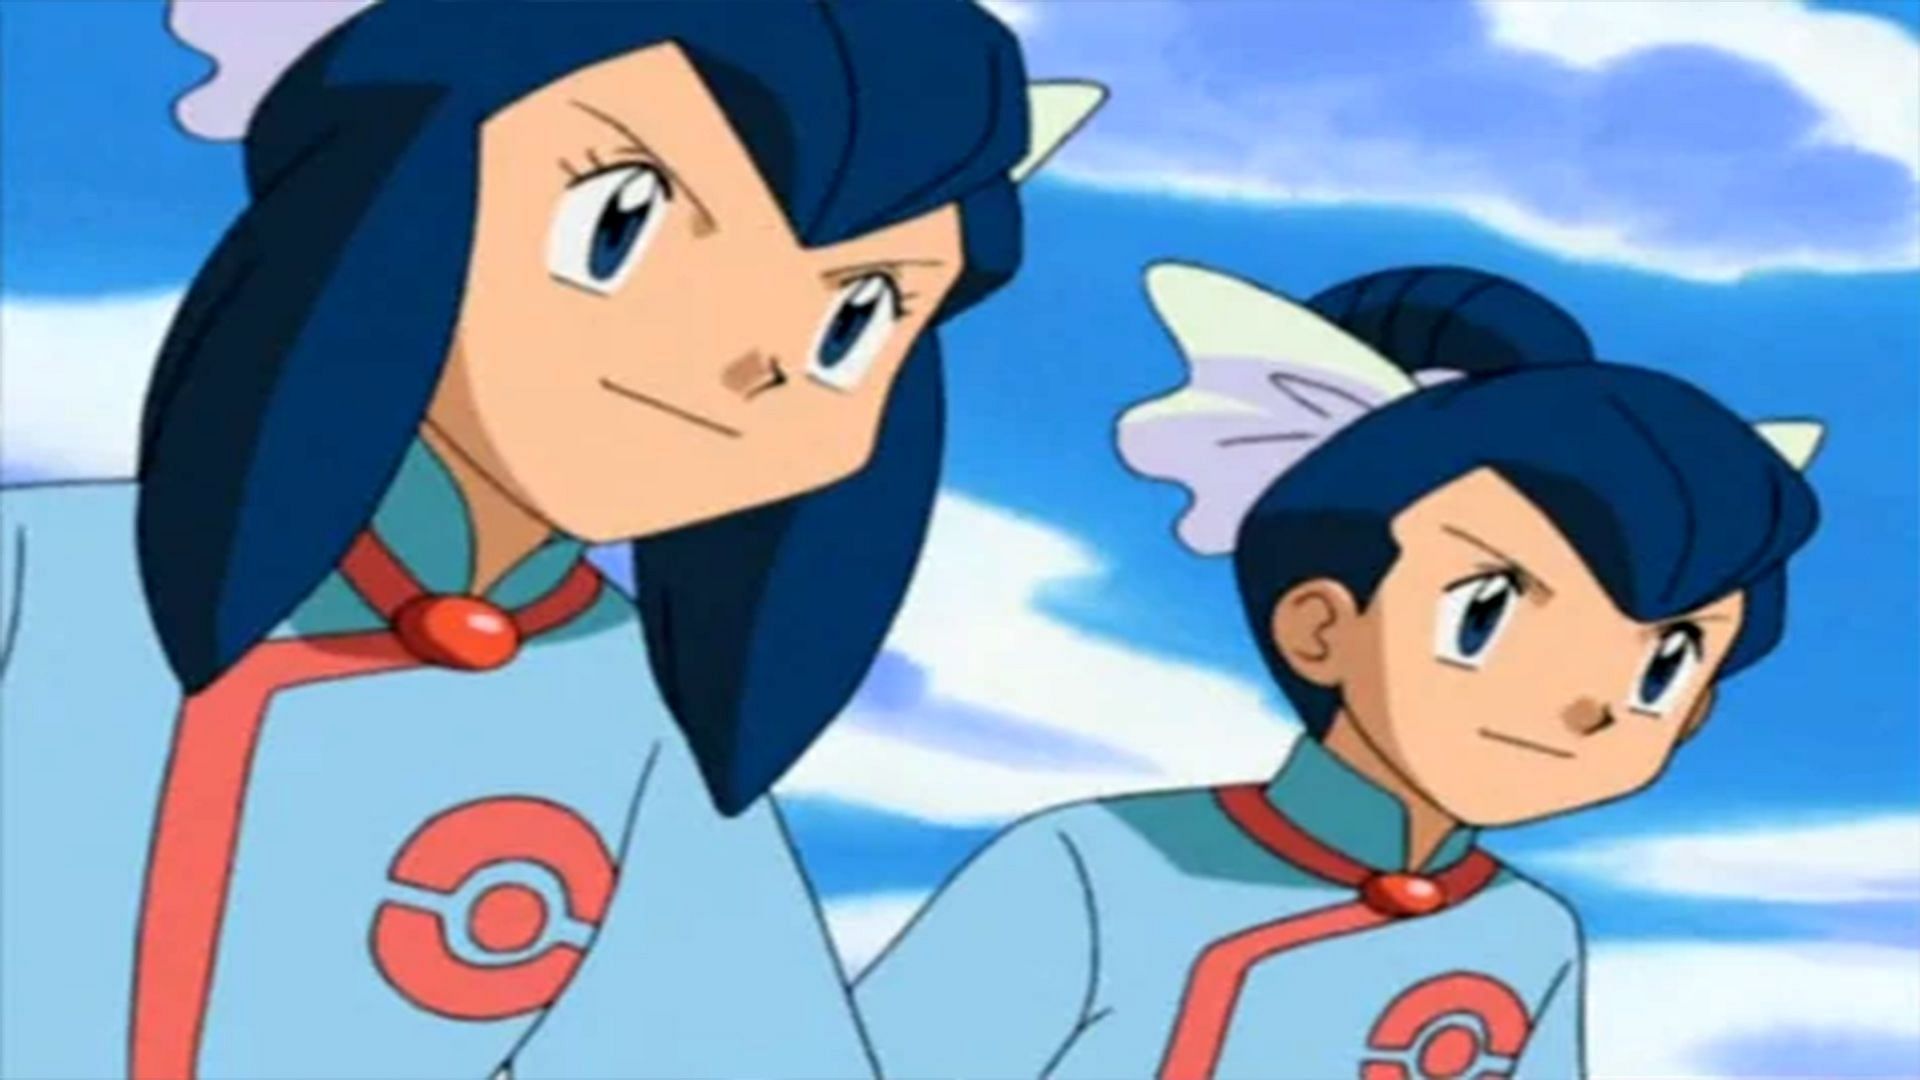 Tate And Liza as they appear in the anime (Image via The Pokemon Company)